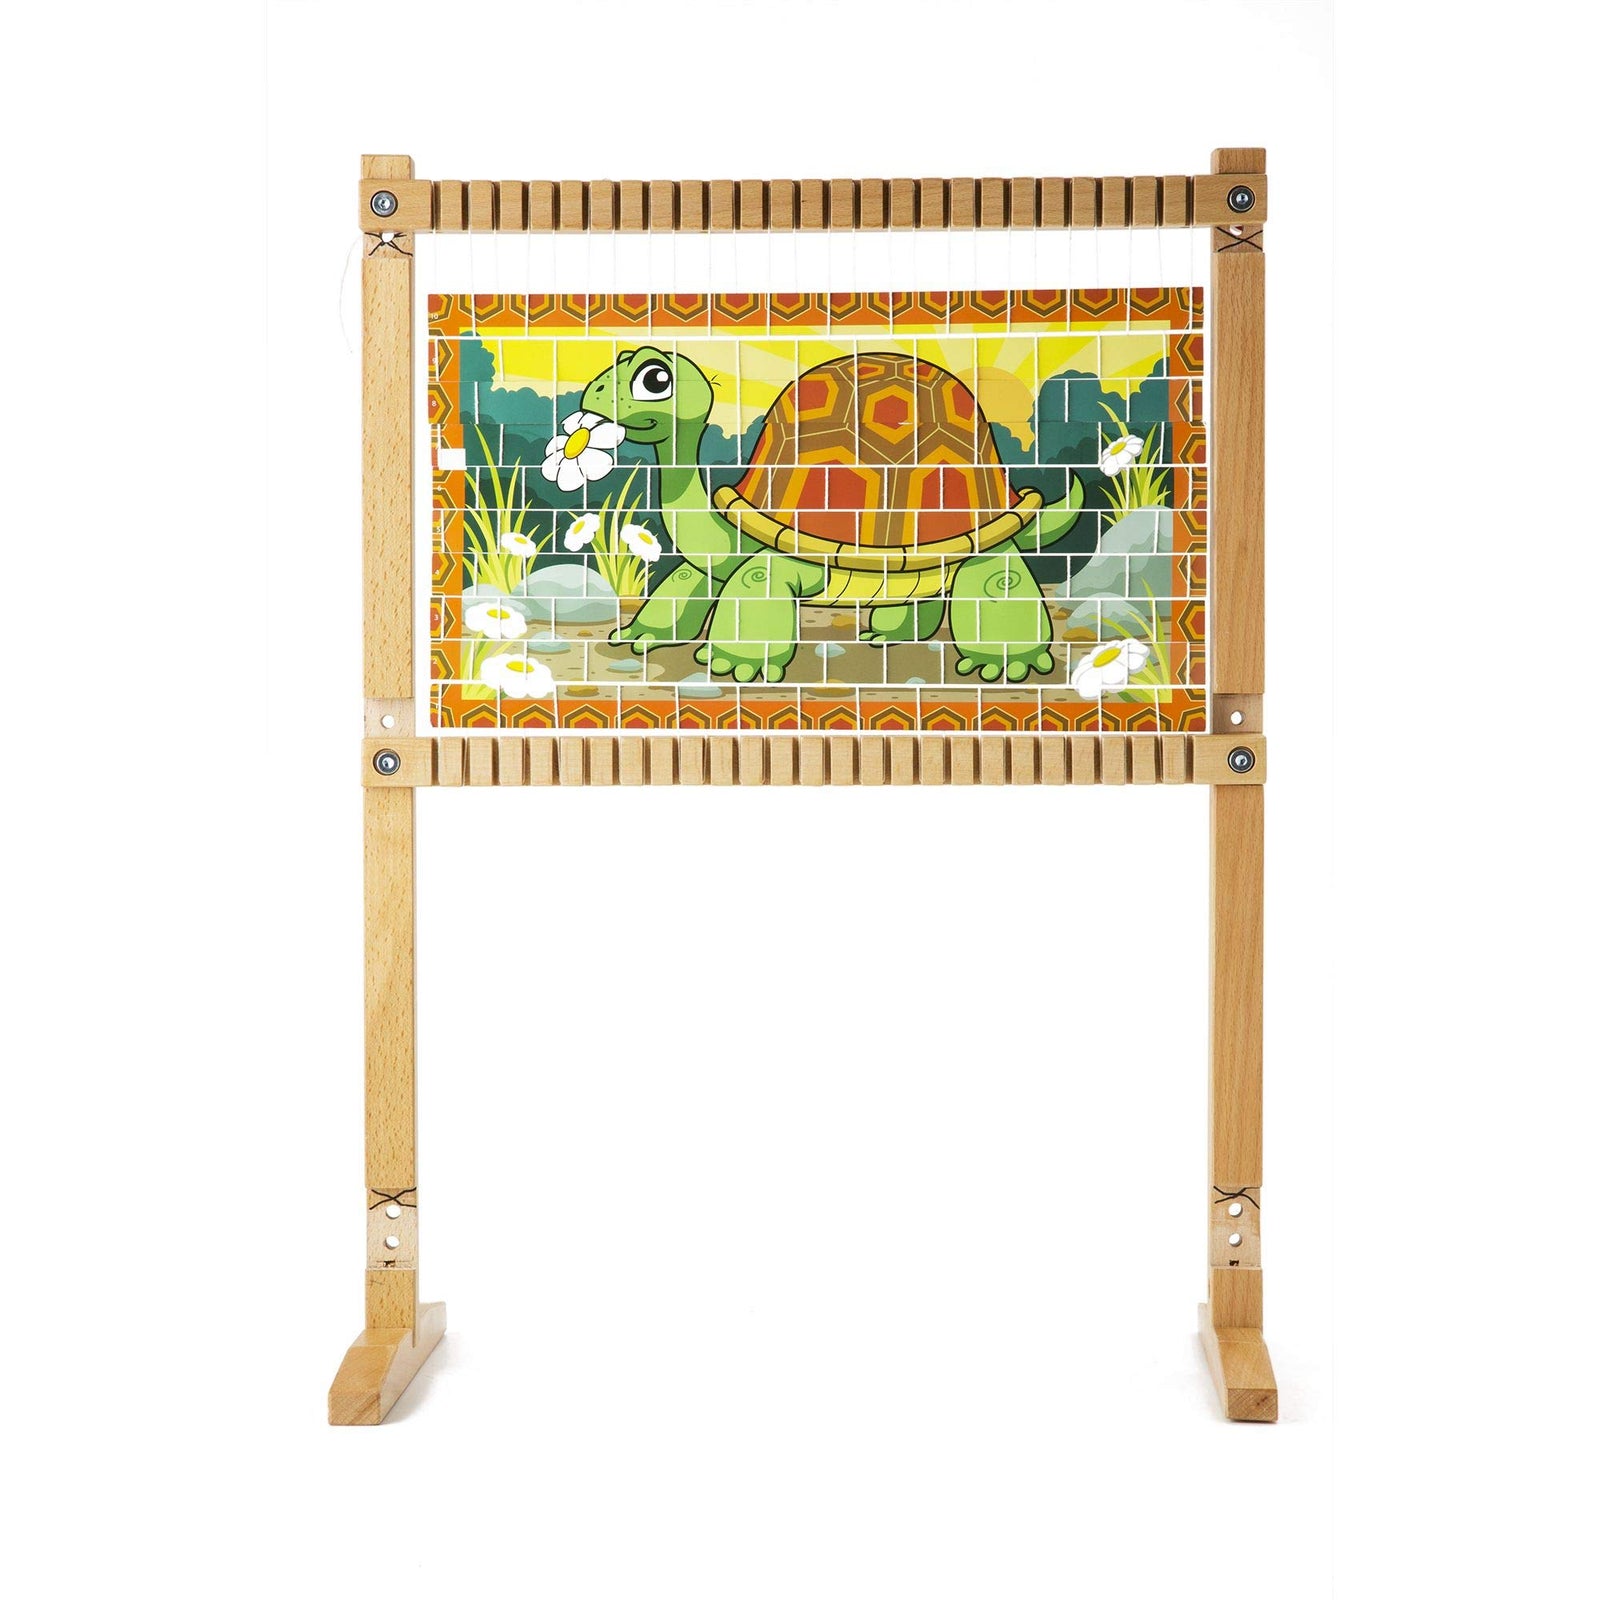 Melissa & Doug Wooden Multi-Craft Weaving Loom: Extra-Large Frame (22.75 x 16.5 inches)